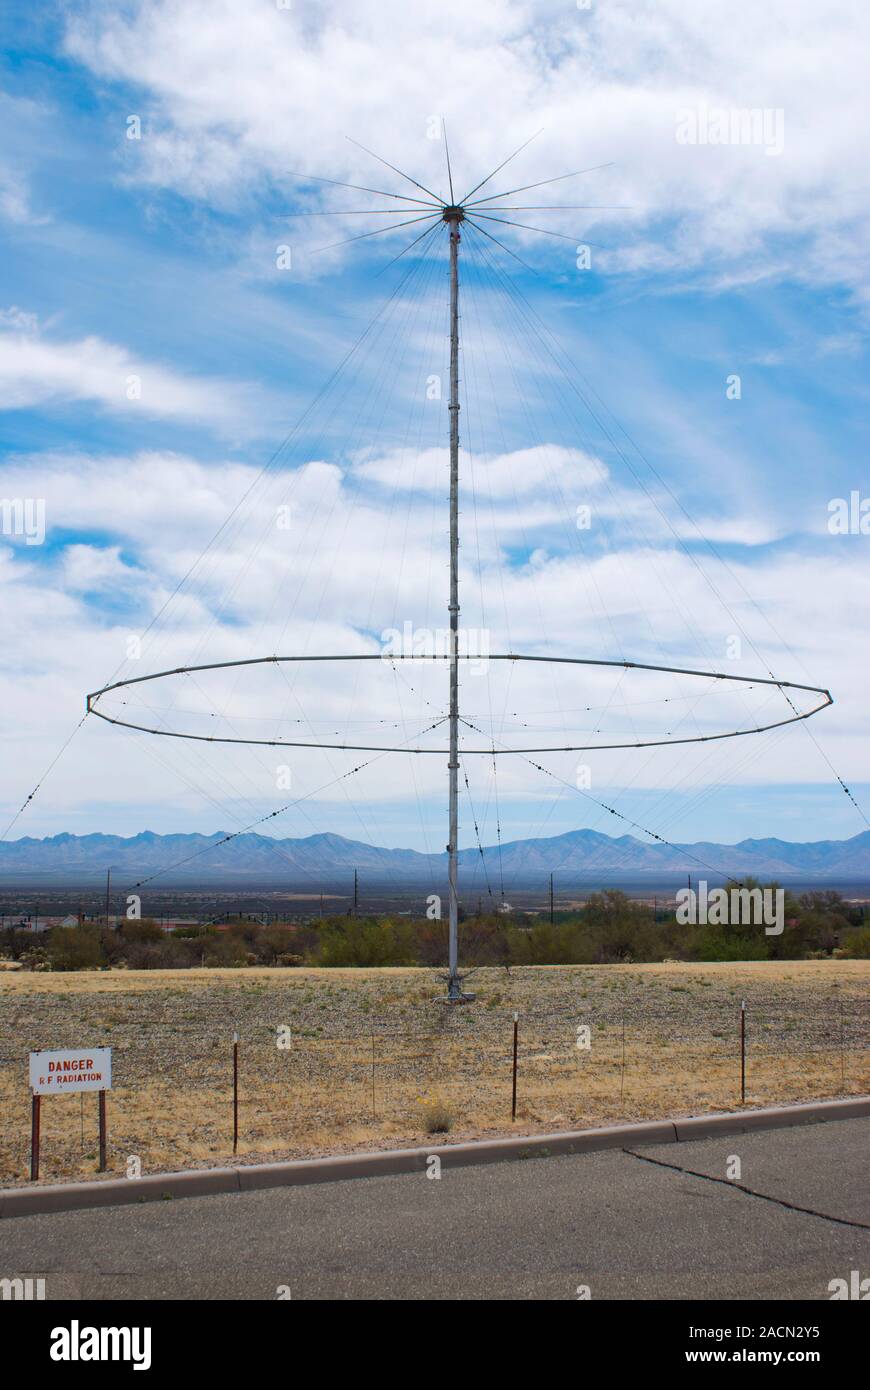 A discone radio antenna at Titan Missile Museum, near Tucson, Arizona. A variant of a biconical antenna in which one of the cones is replaced by a dis Stock Photo